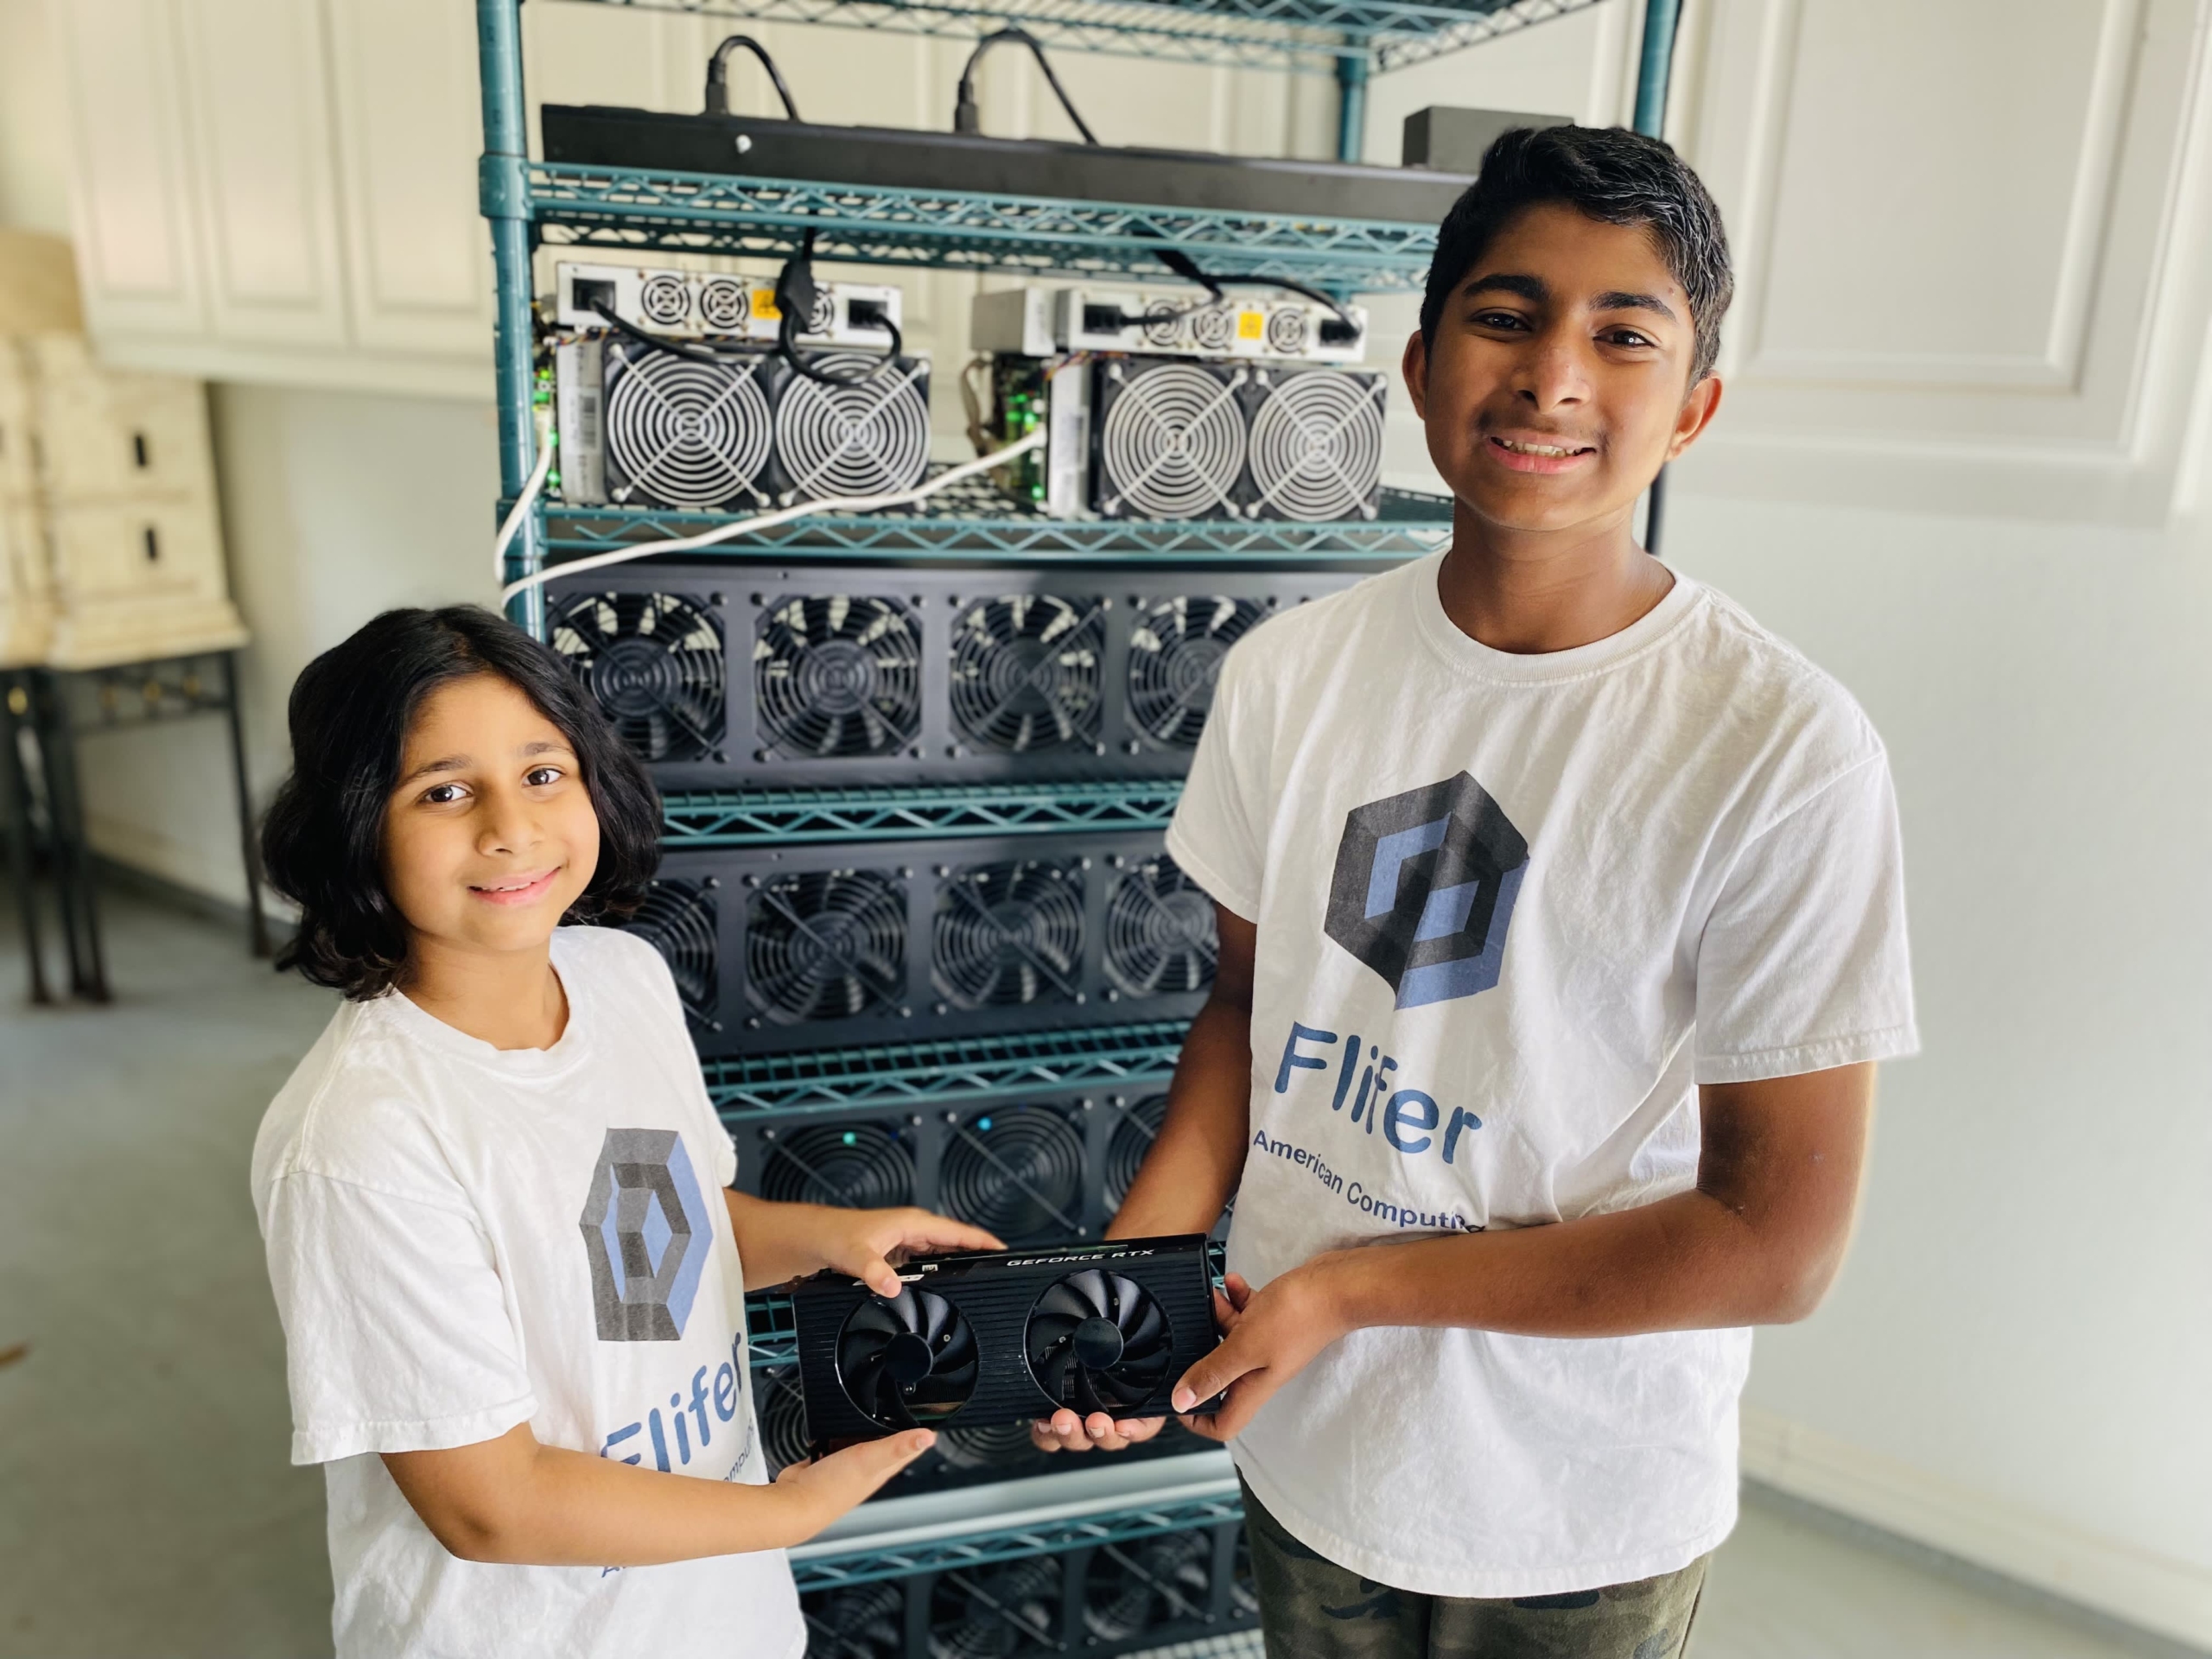 Young siblings build crypto mining business, earning $30,000 per month